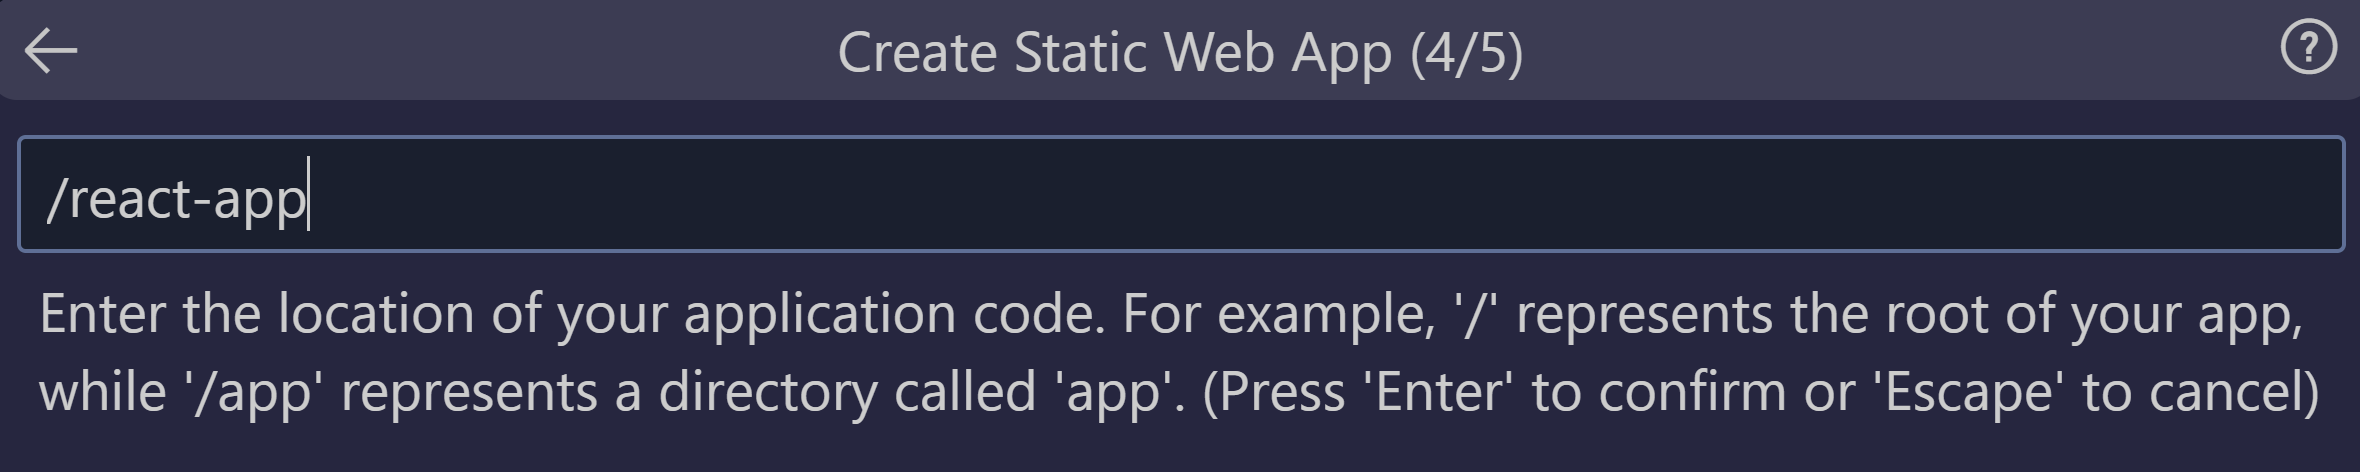 Screenshot showing the code location entered as react app.